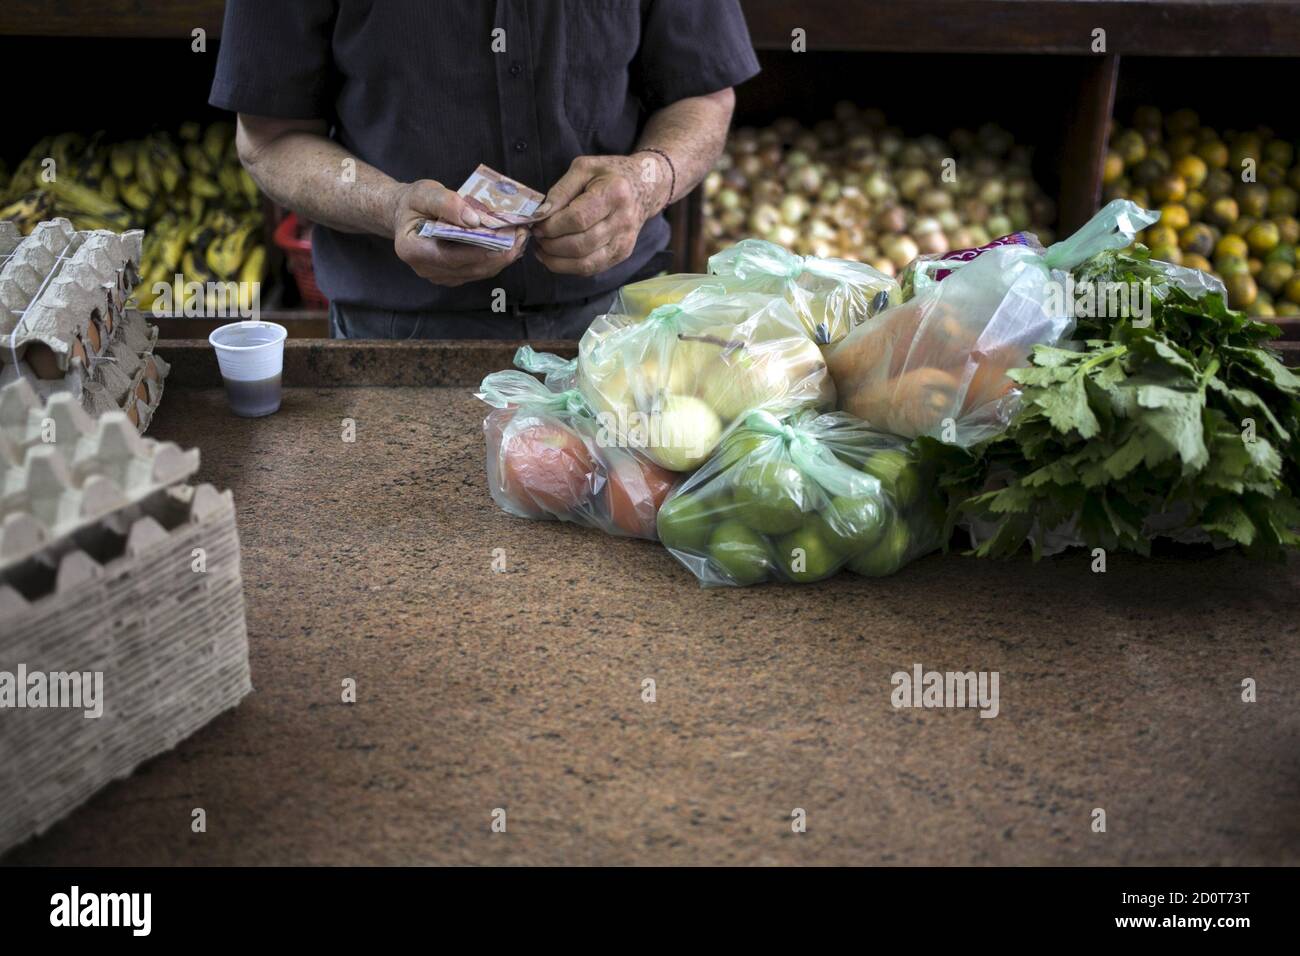 A clerk counts Venezuelan bolivar banknotes after selling goods to a customer at a fruit and vegetable store in Caracas, July 10, 2015. A debilitating recession and a drop in oil prices have harmed the OPEC nation's ability to provide dollars through its complex three-tiered currency control system, pushing up the black market rate at a dizzying speed. The bolivar sank past 600 per U.S. dollar on Thursday, compared with 73 a year ago, according to anti-government website DolarToday. REUTERS/Marco Bello Stock Photo